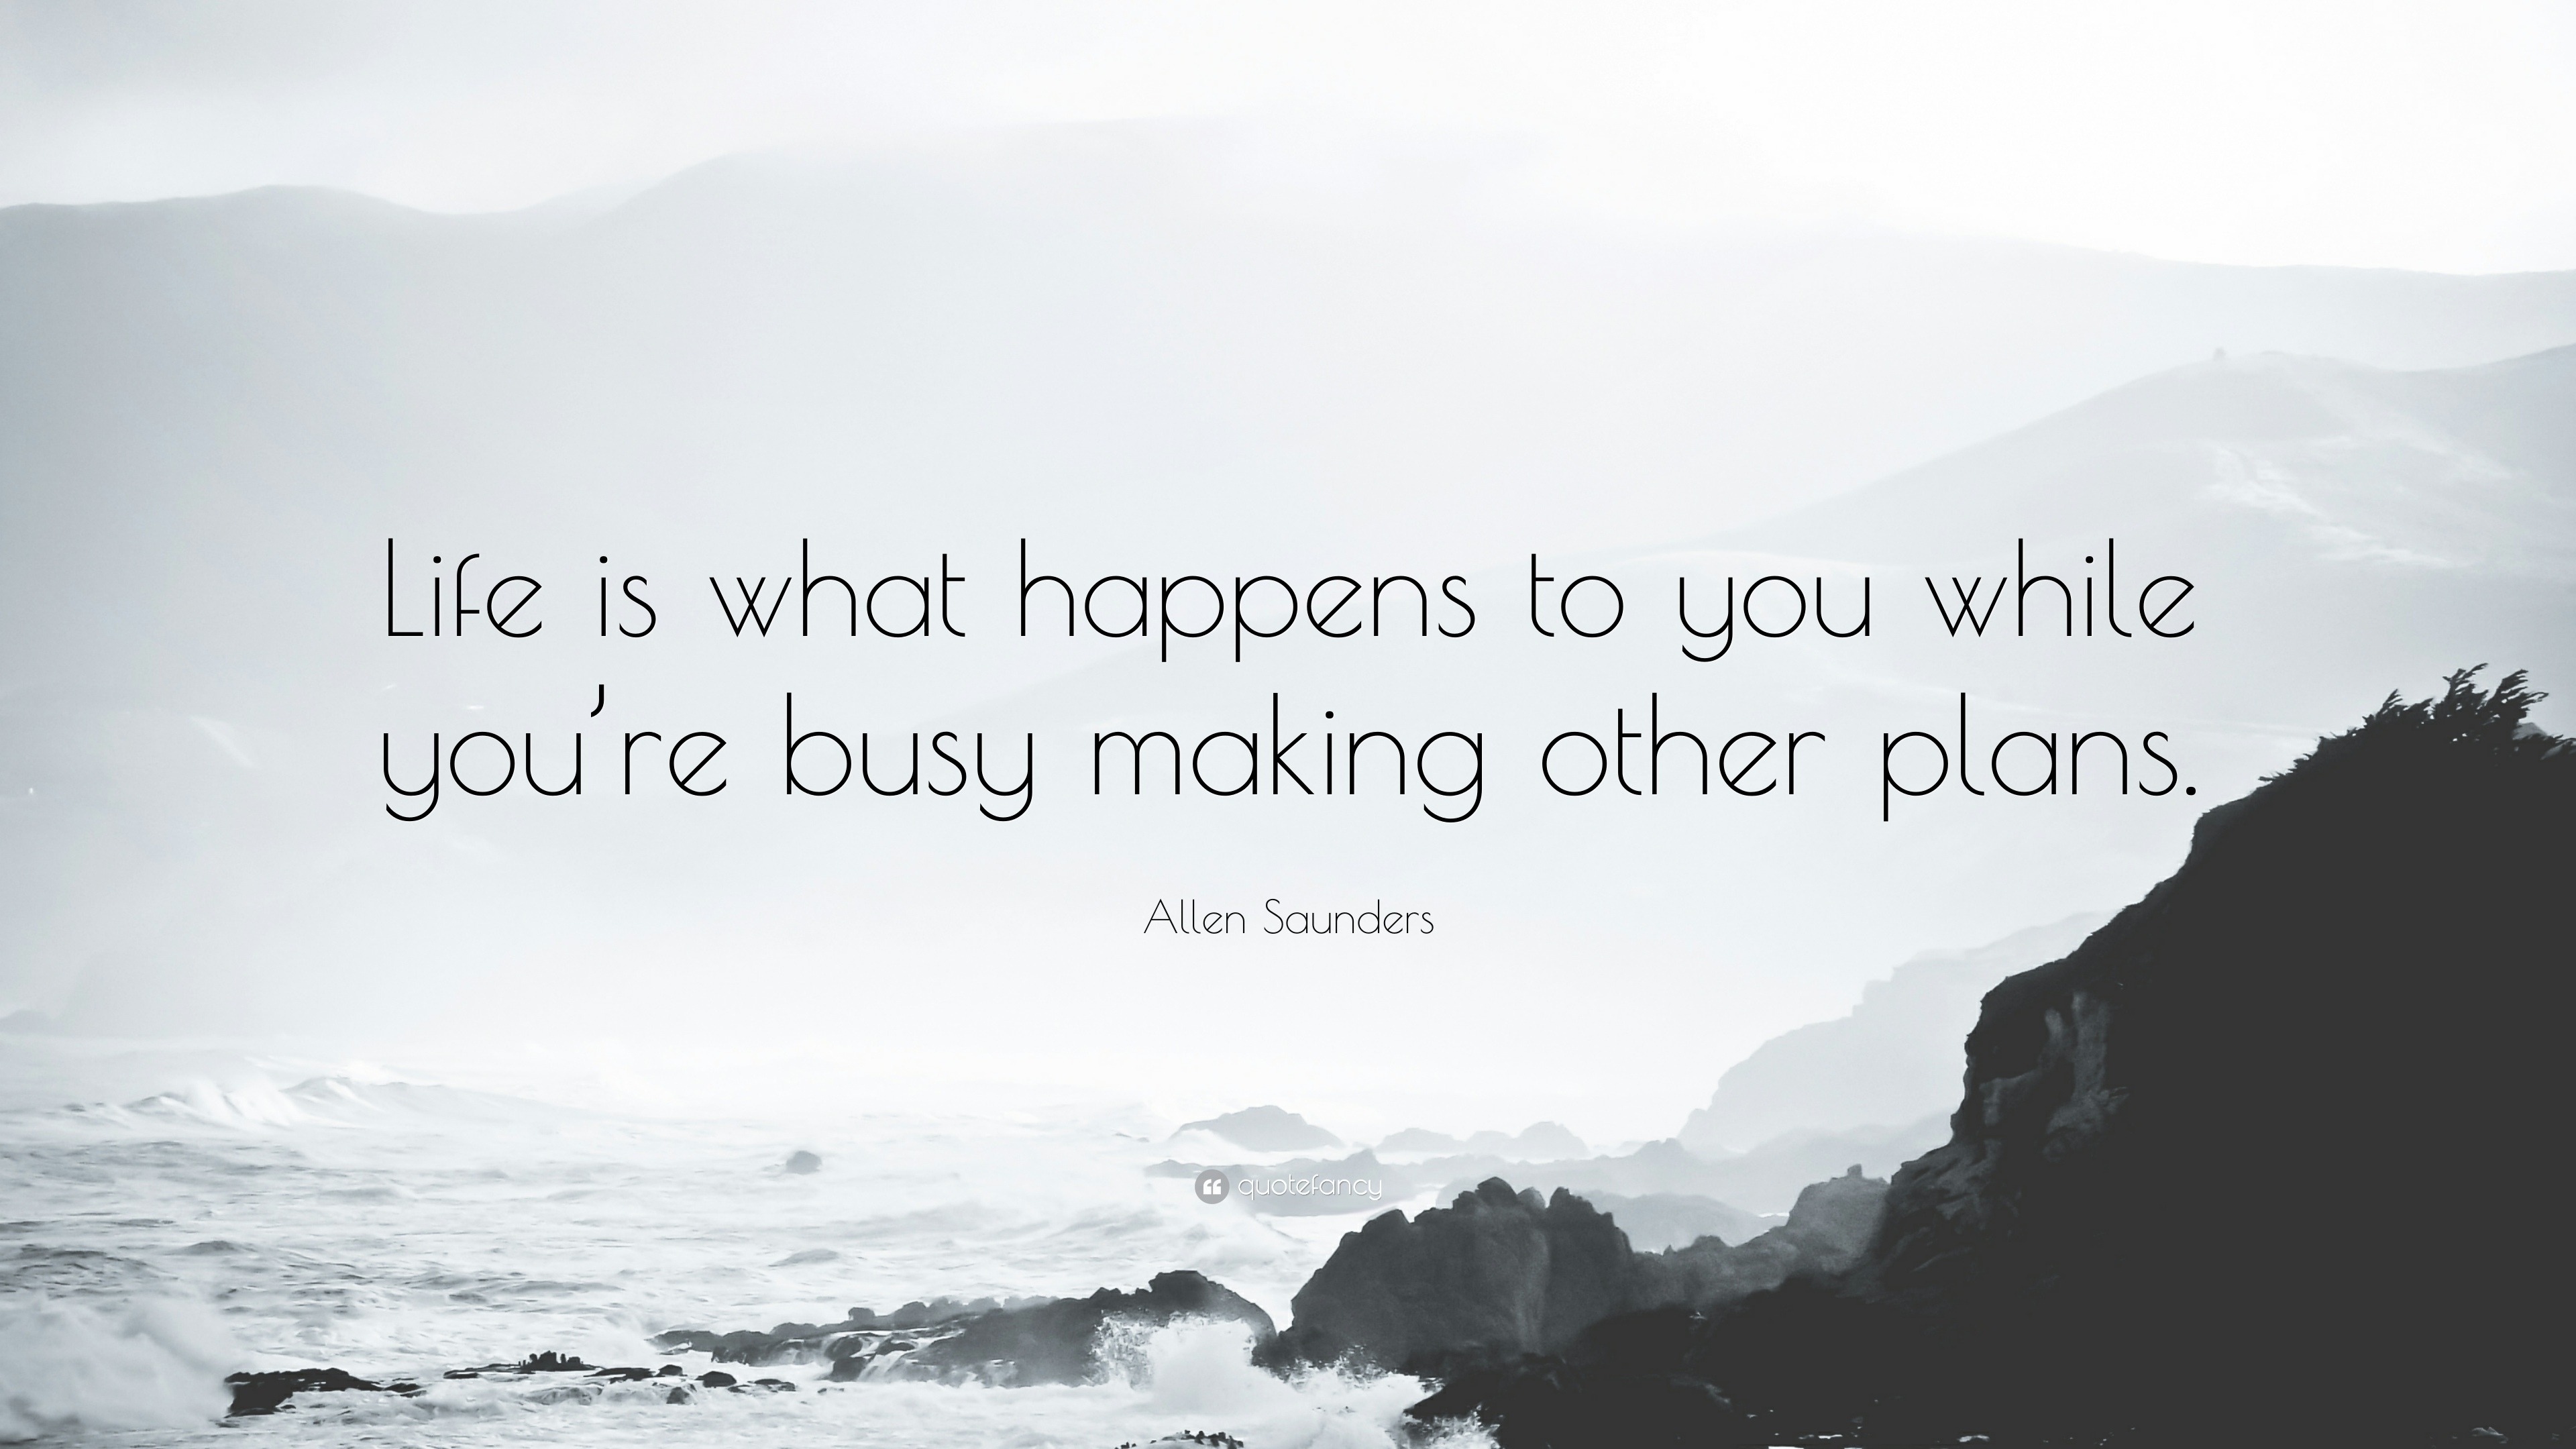 Allen Saunders Quote: "Life is what happens to you while ...